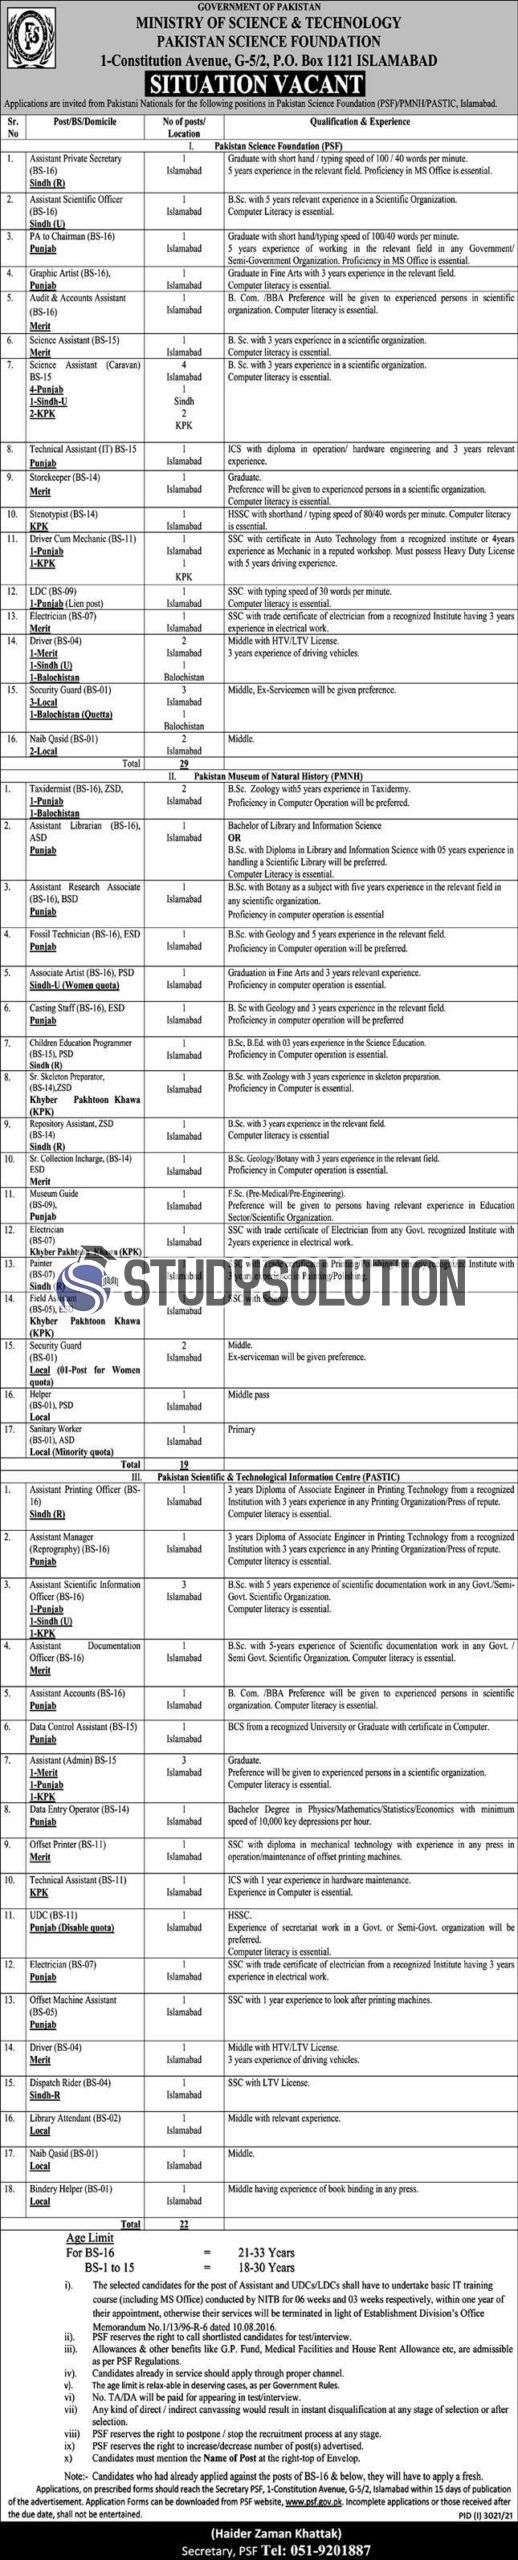 Pakistan Science Foundation PSF Ministry of Science and Technology Jobs 2021